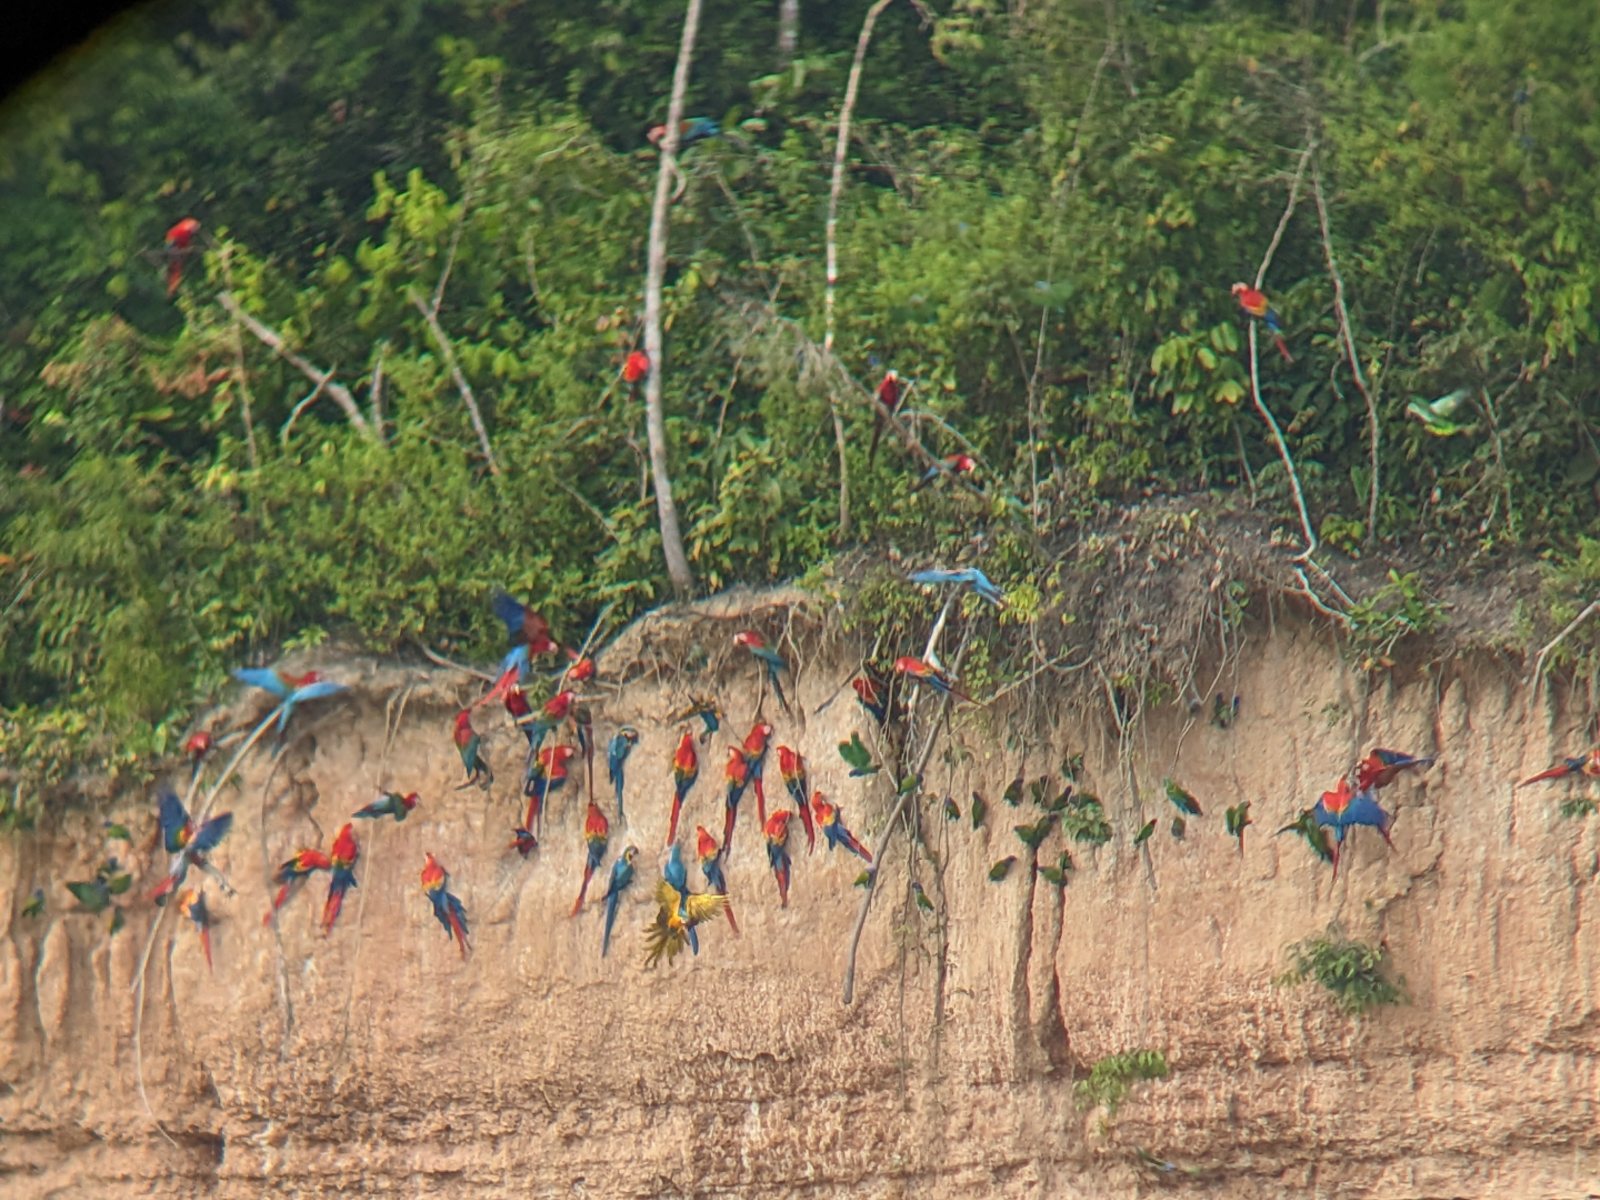 Parrots gathering on the cliffside